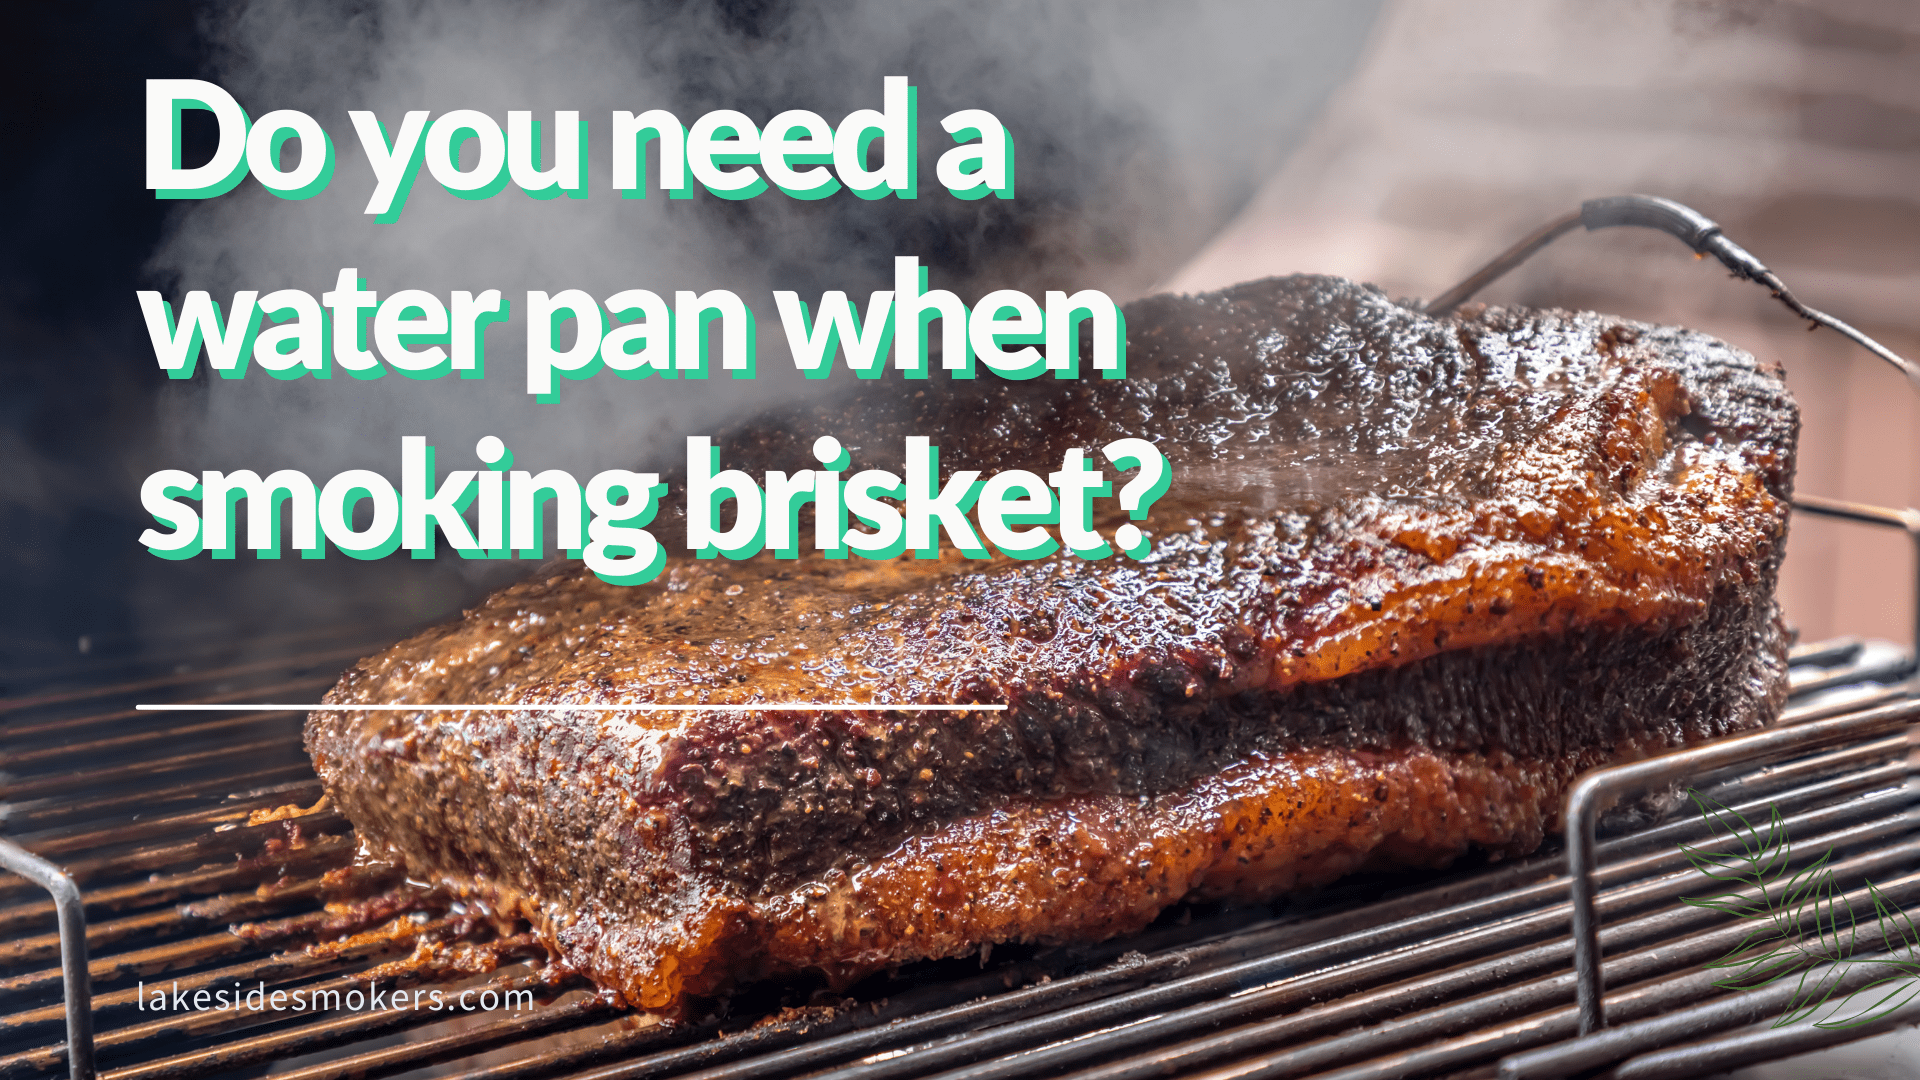 https://www.lakesidesmokers.com/wp-content/uploads/2022/04/Do-you-need-a-water-pan-when-smoking-brisket-Absolutely.png